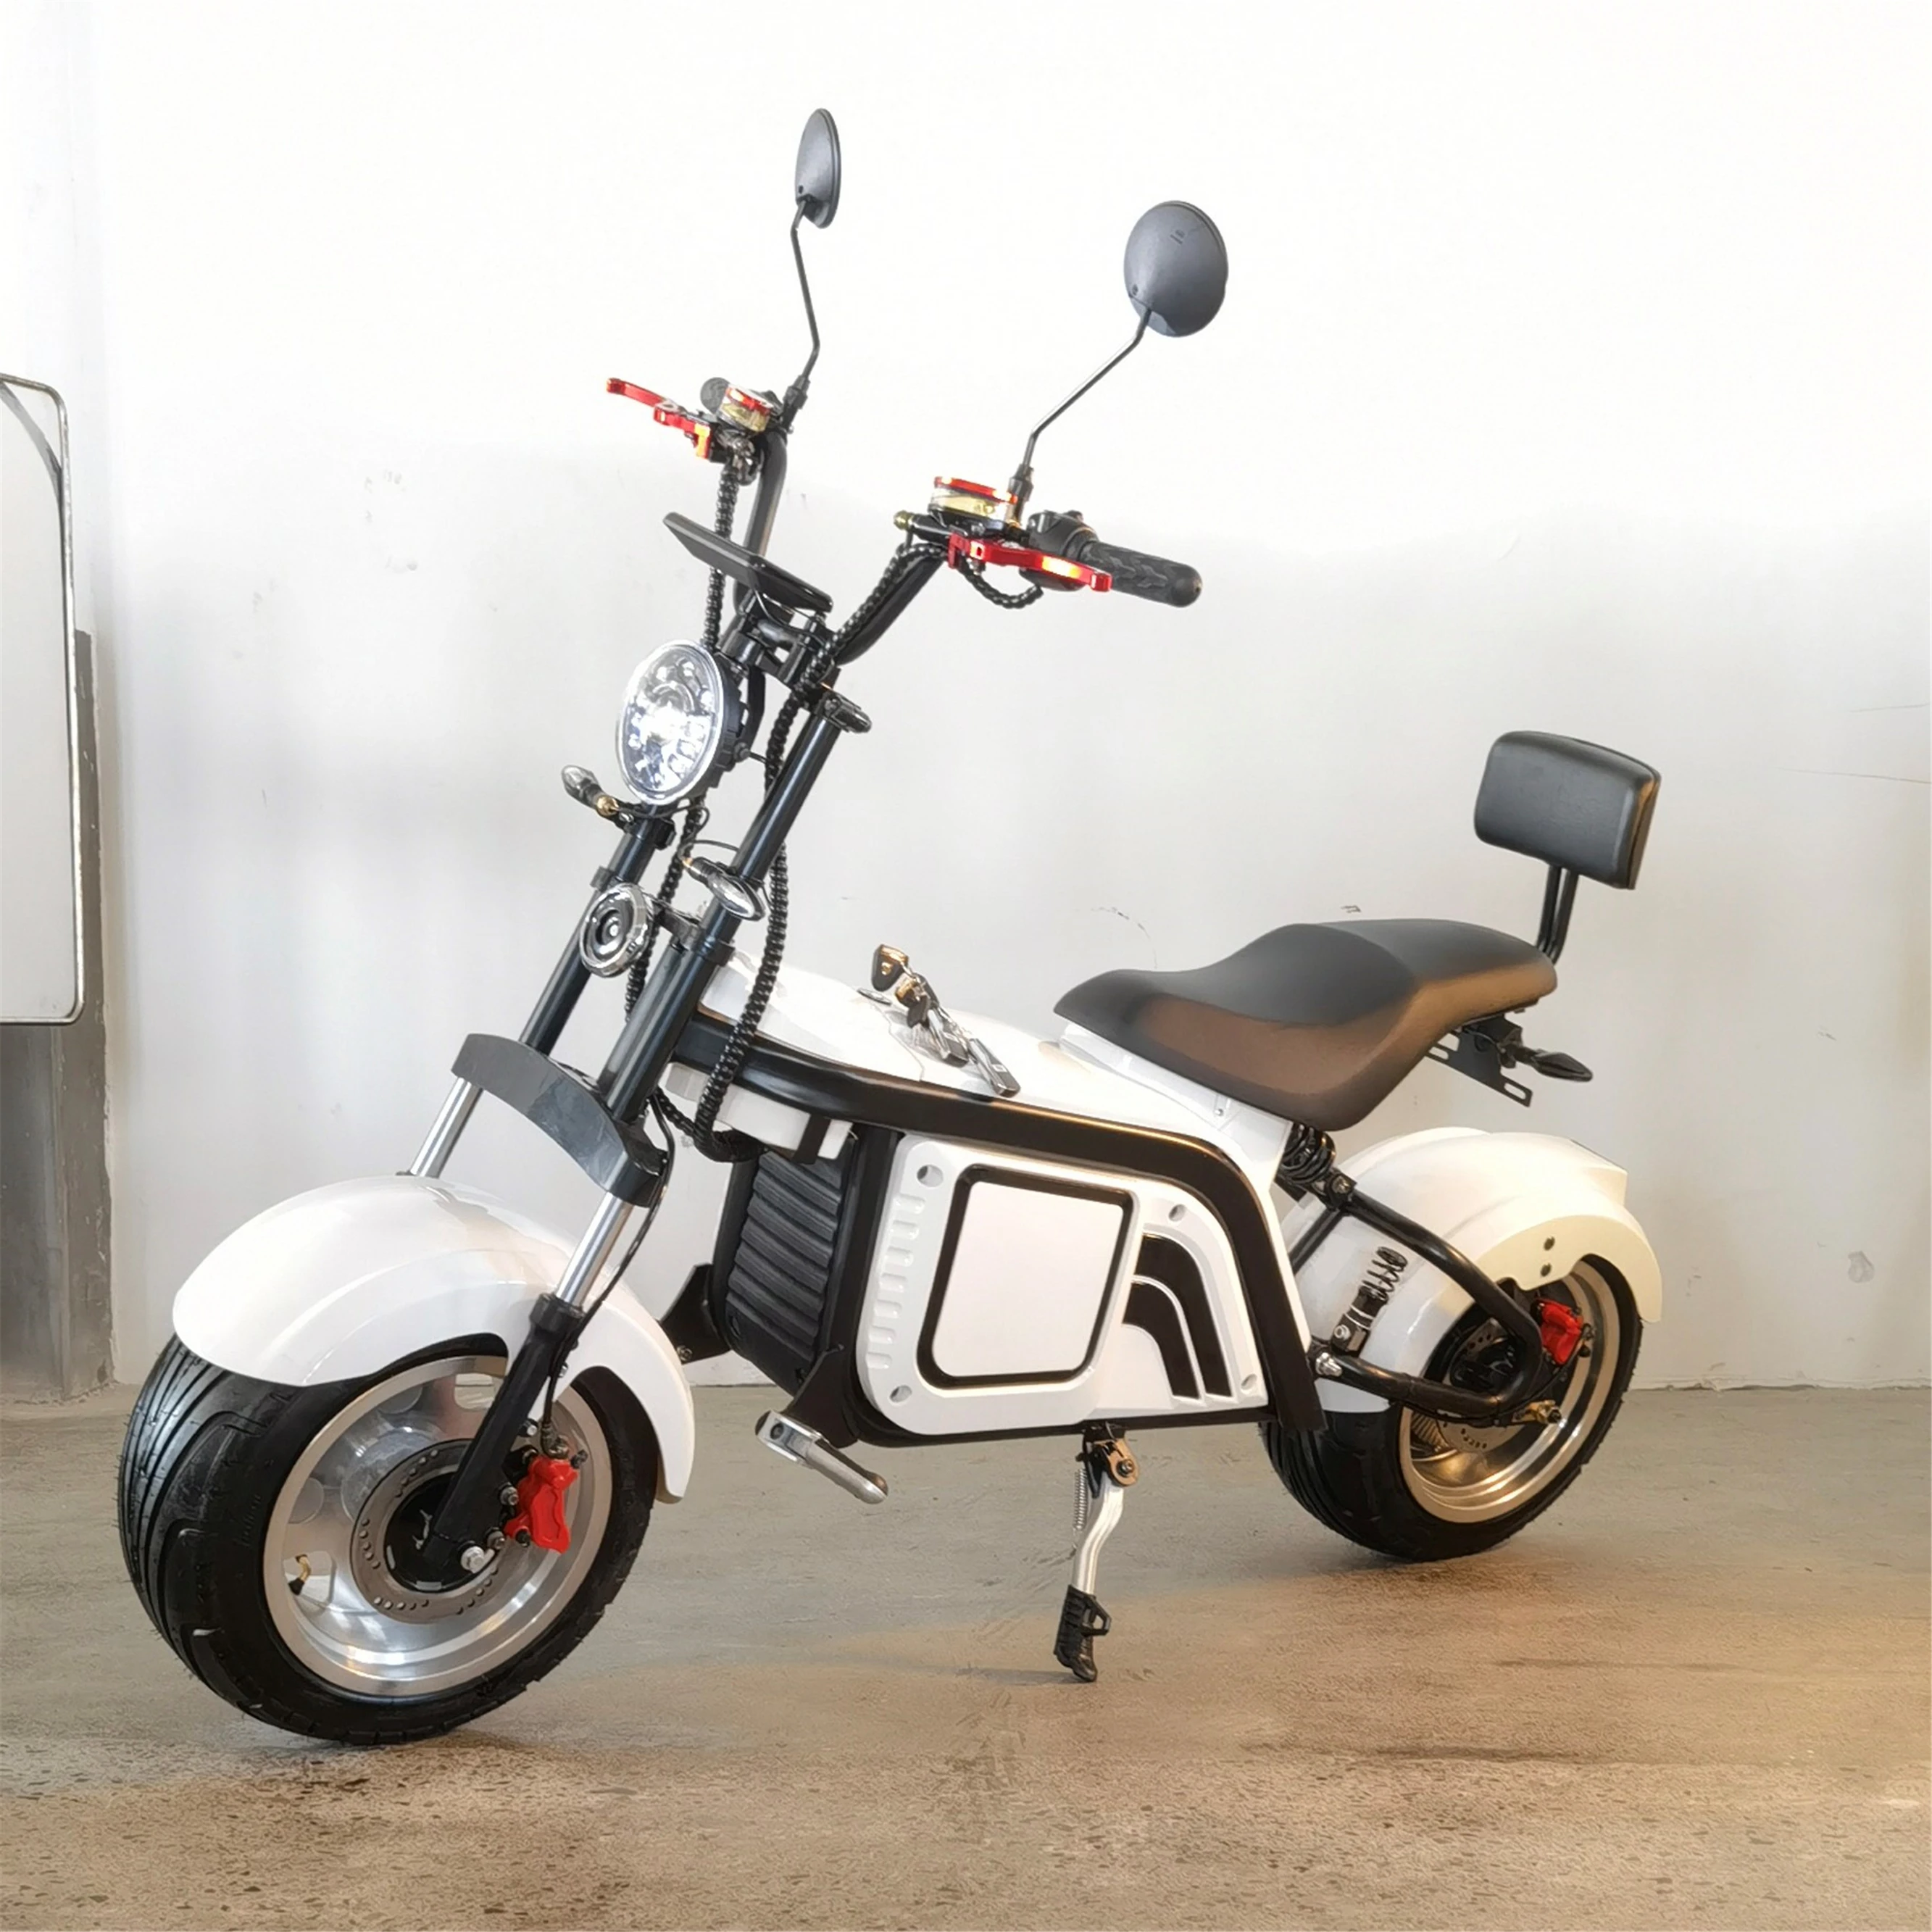 

New Arrival EU Warehouse EEC/COC Citycoco 1200W Electric Scooter In Stock Motorcycle Adult